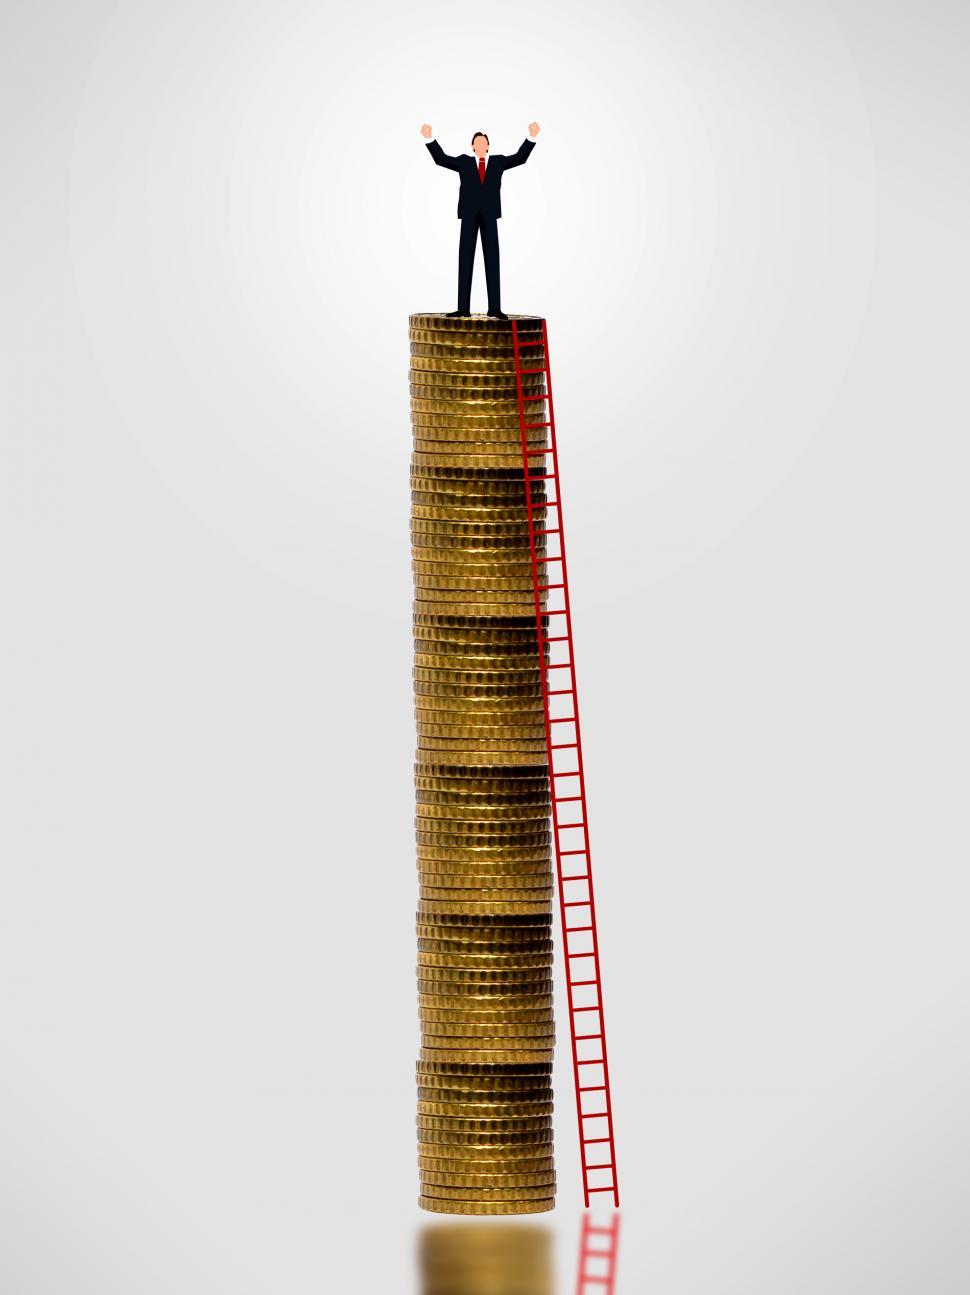 Free Image of Businessman on top of gold coin stack - Wealth growth concept 